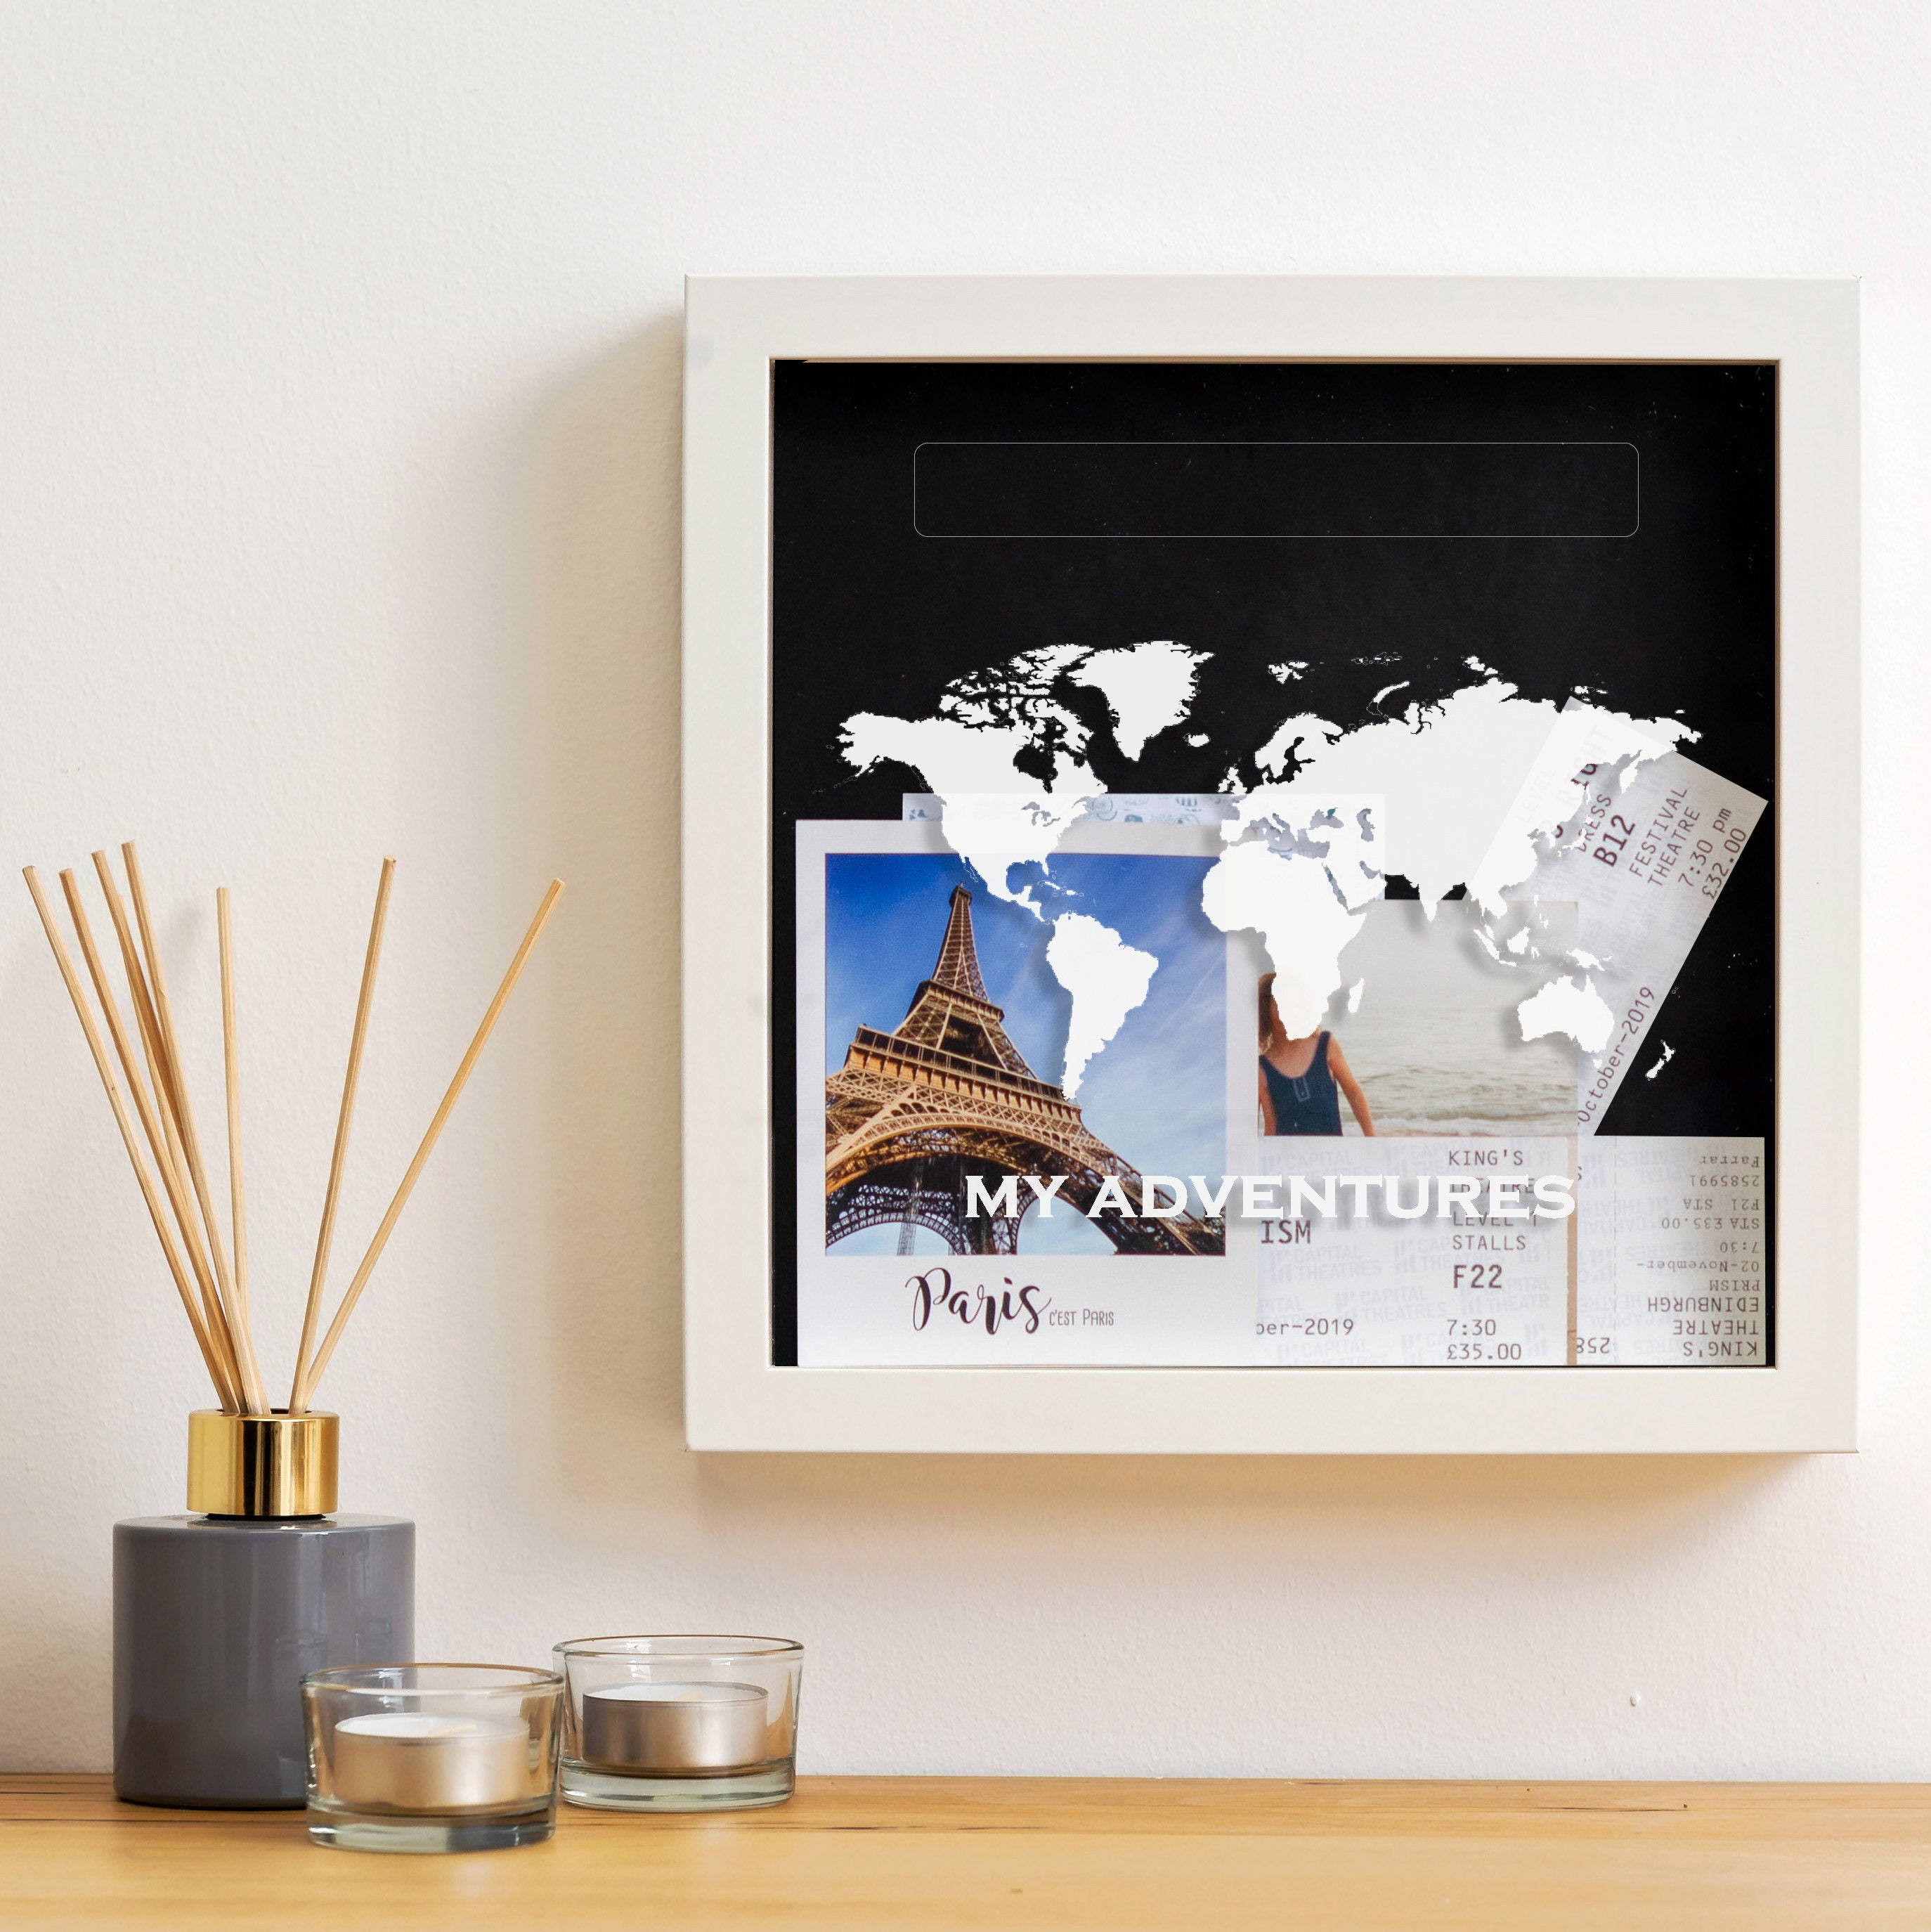 Adventure Archive Box Ticket Shadow Box with SlotMemory Boxes for